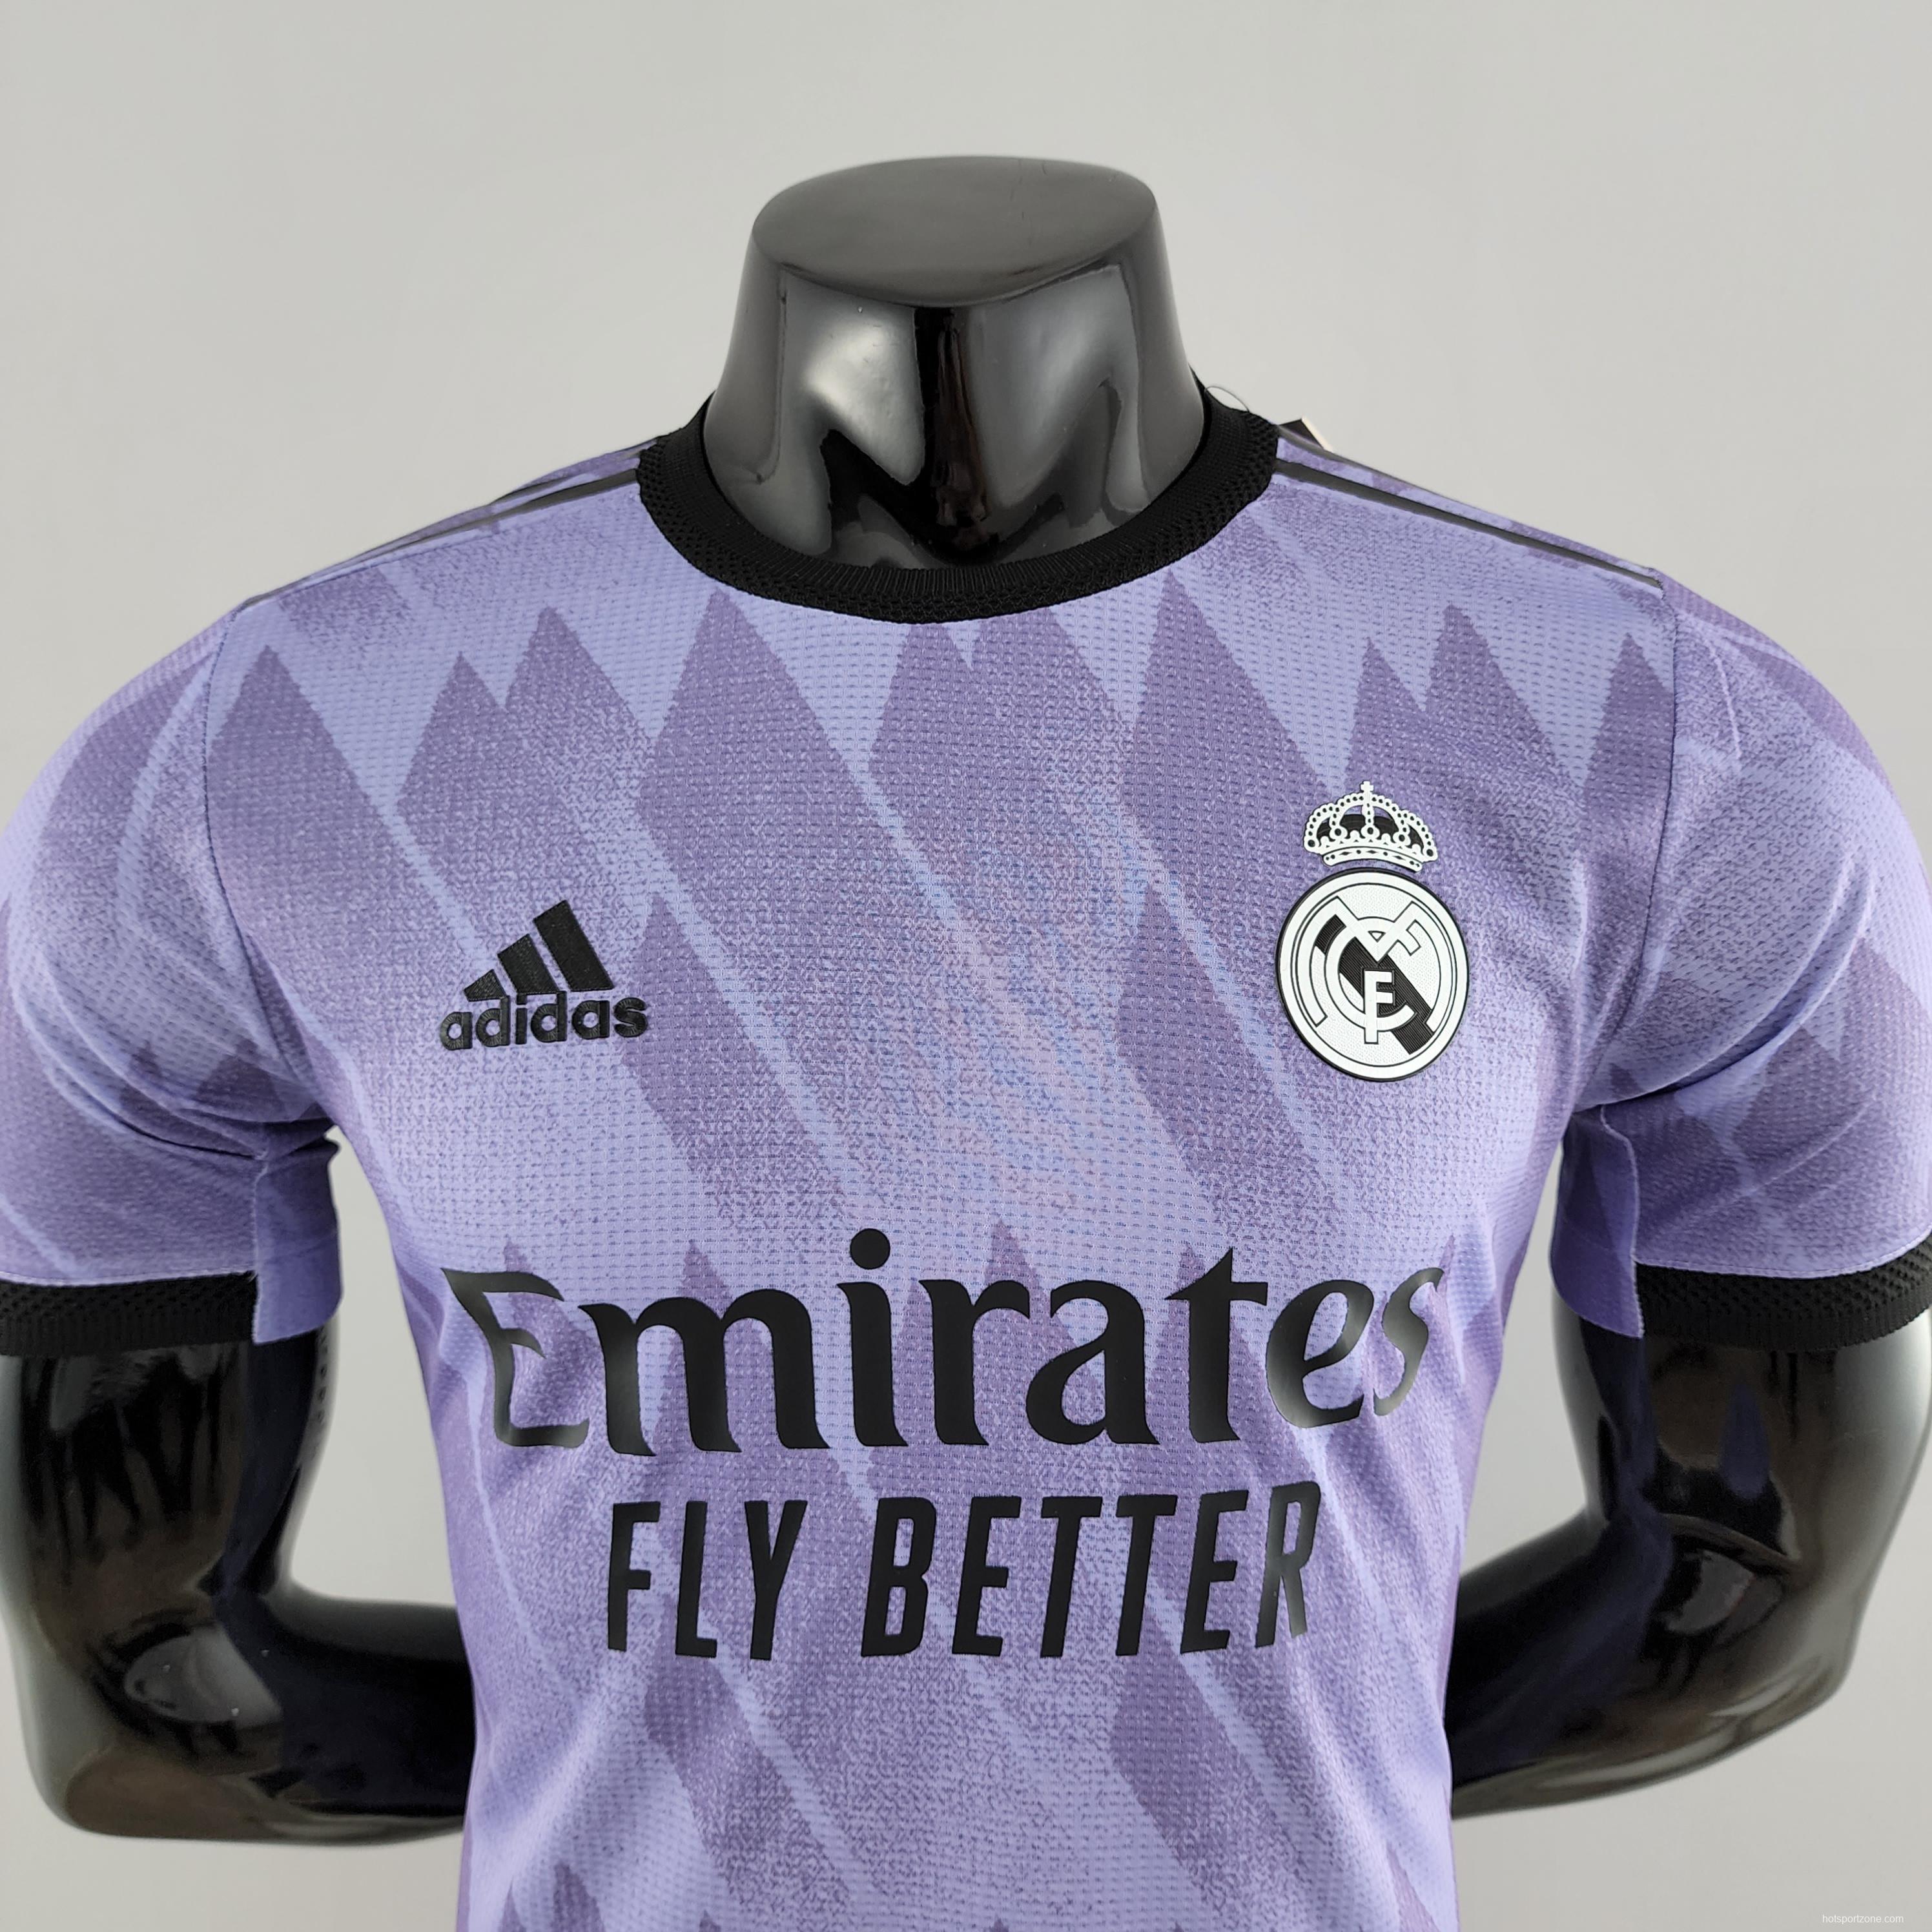 Player Version 22/23 Real Madrid Away Soccer Jersey